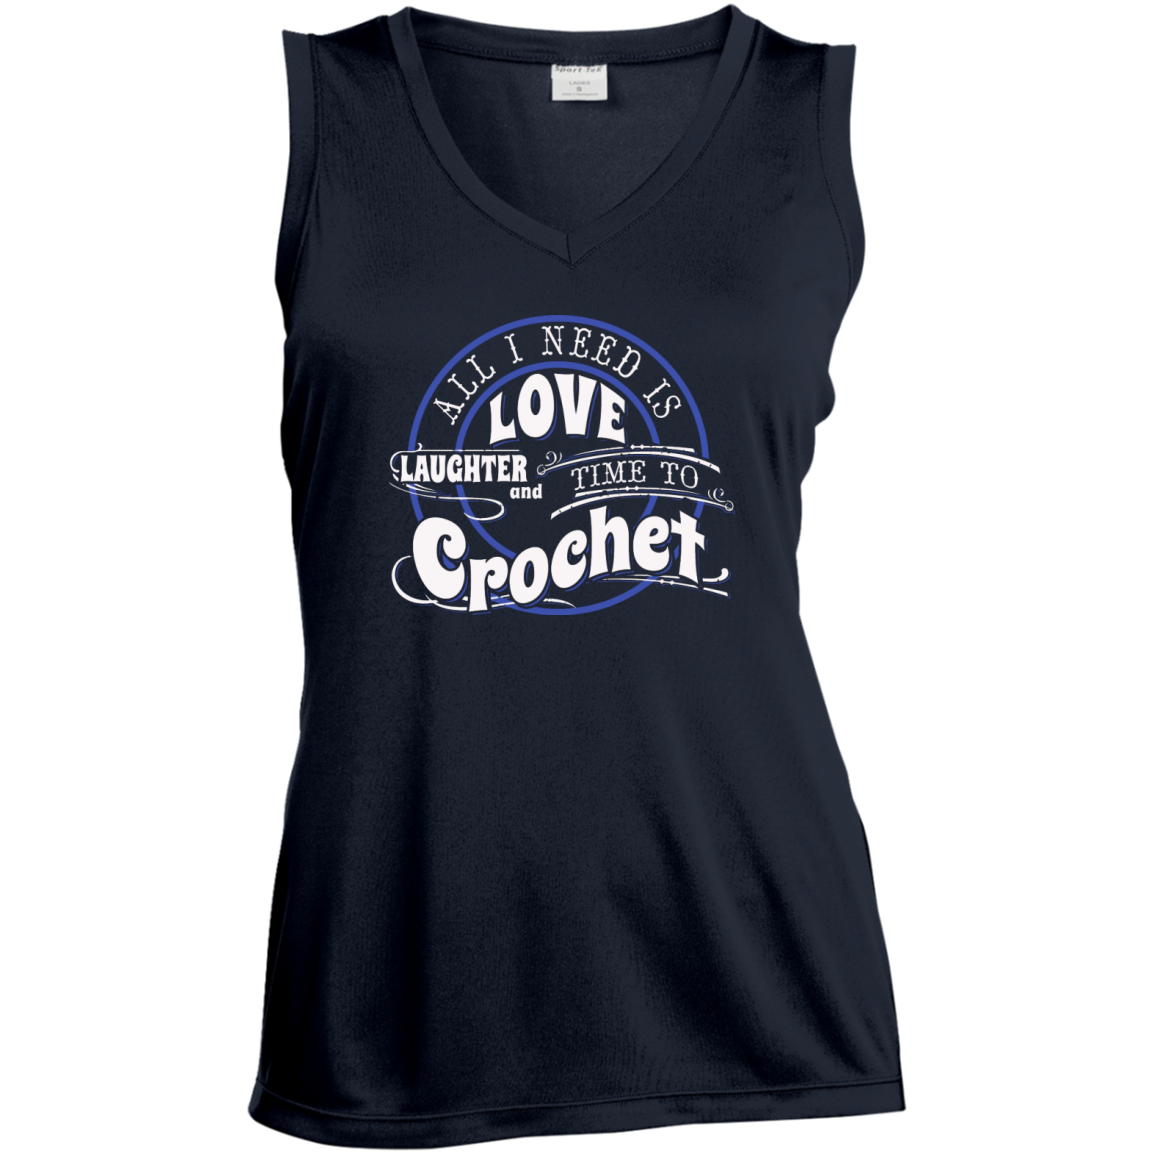 Time to Crochet Ladies Sleeveless V-Neck - Crafter4Life - 1